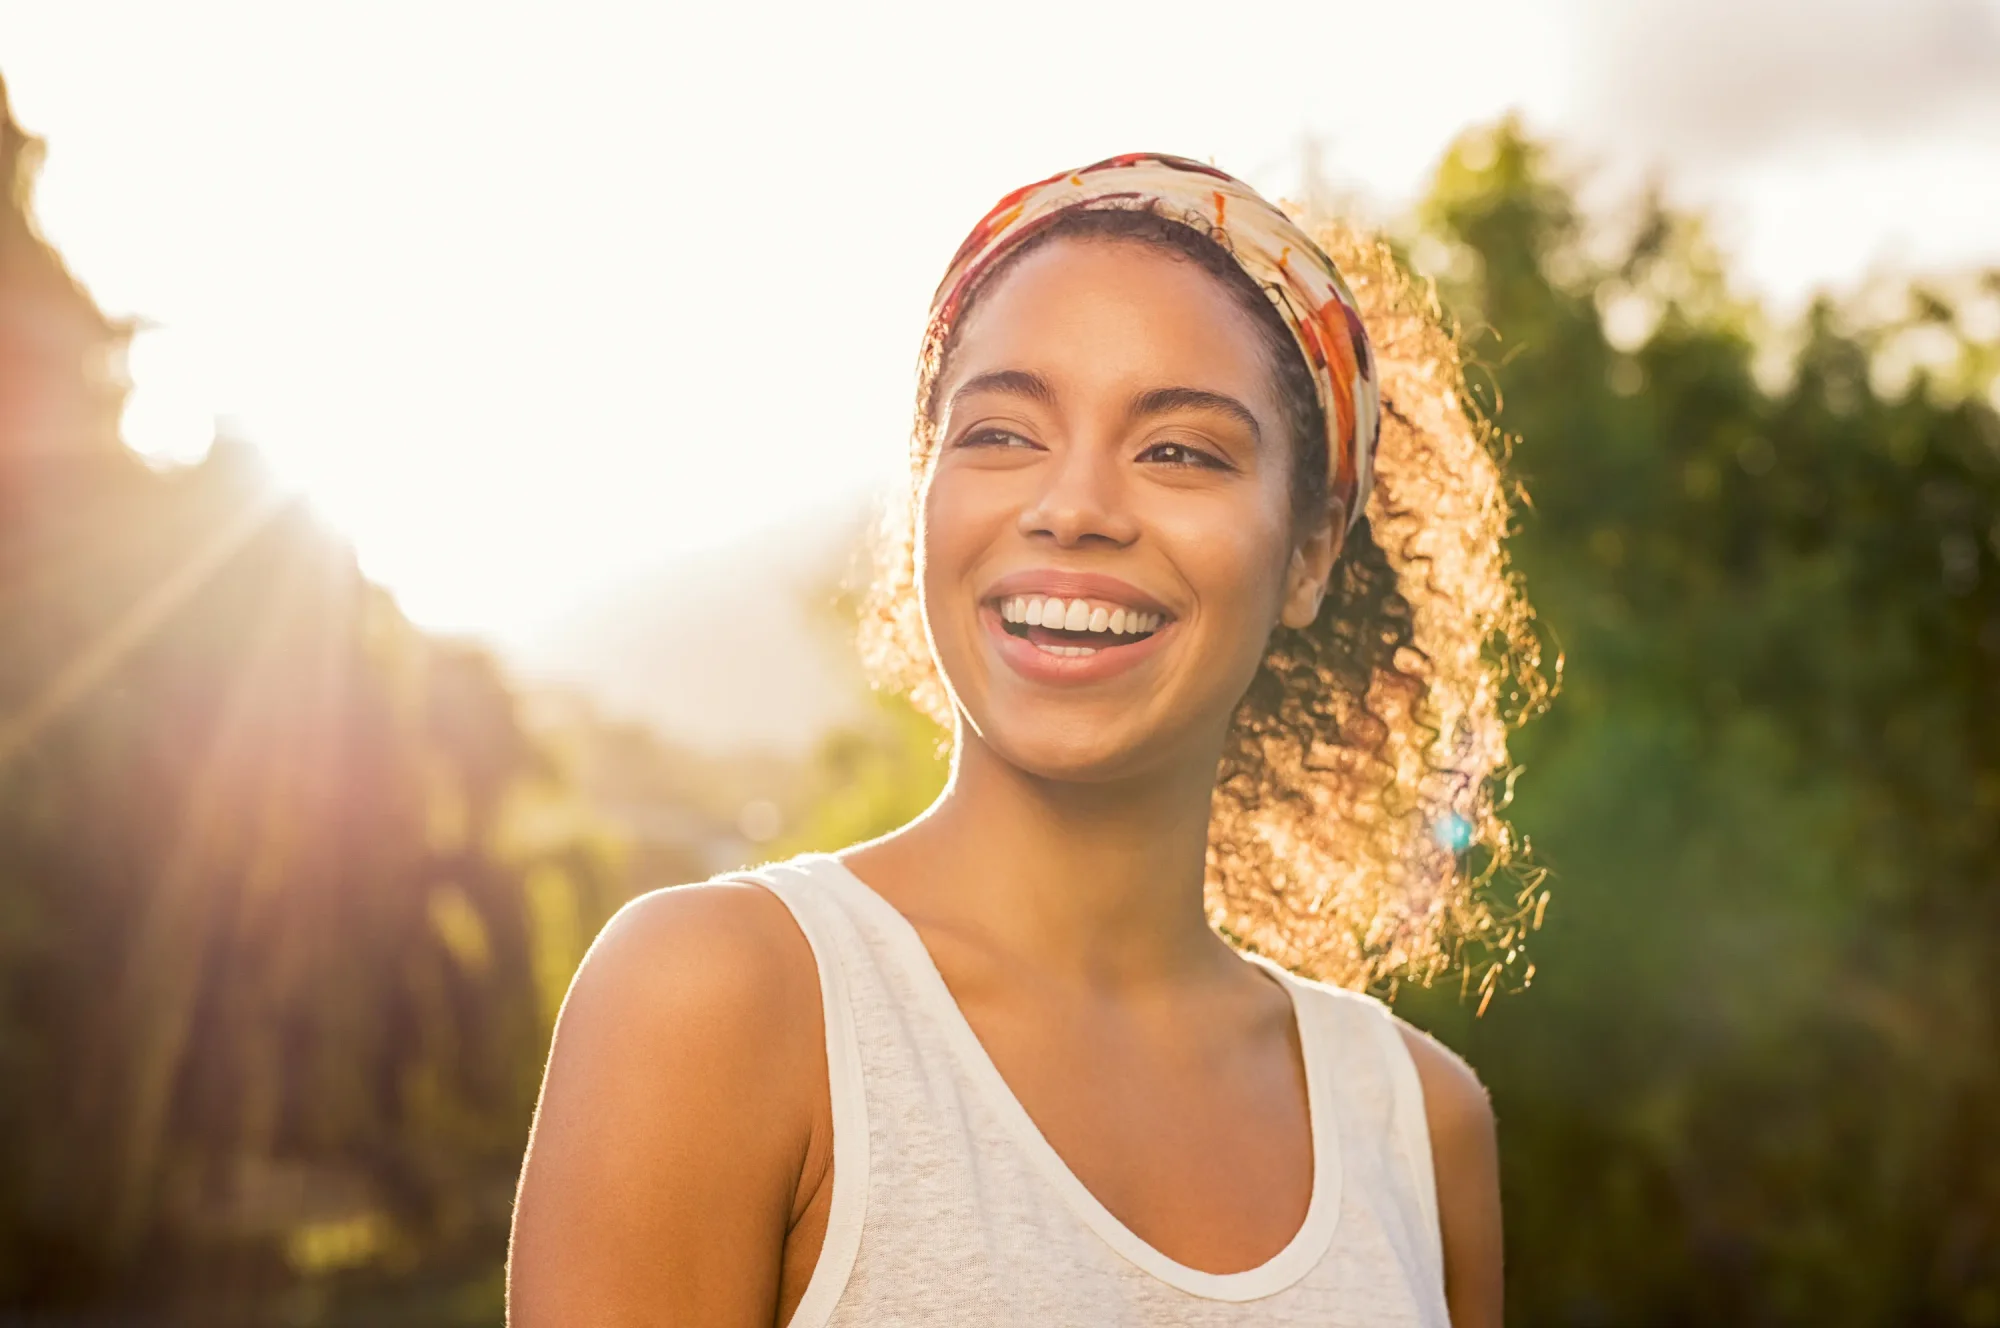 Portrait of smiling woman in the sunshine looking away at nature during sunset.